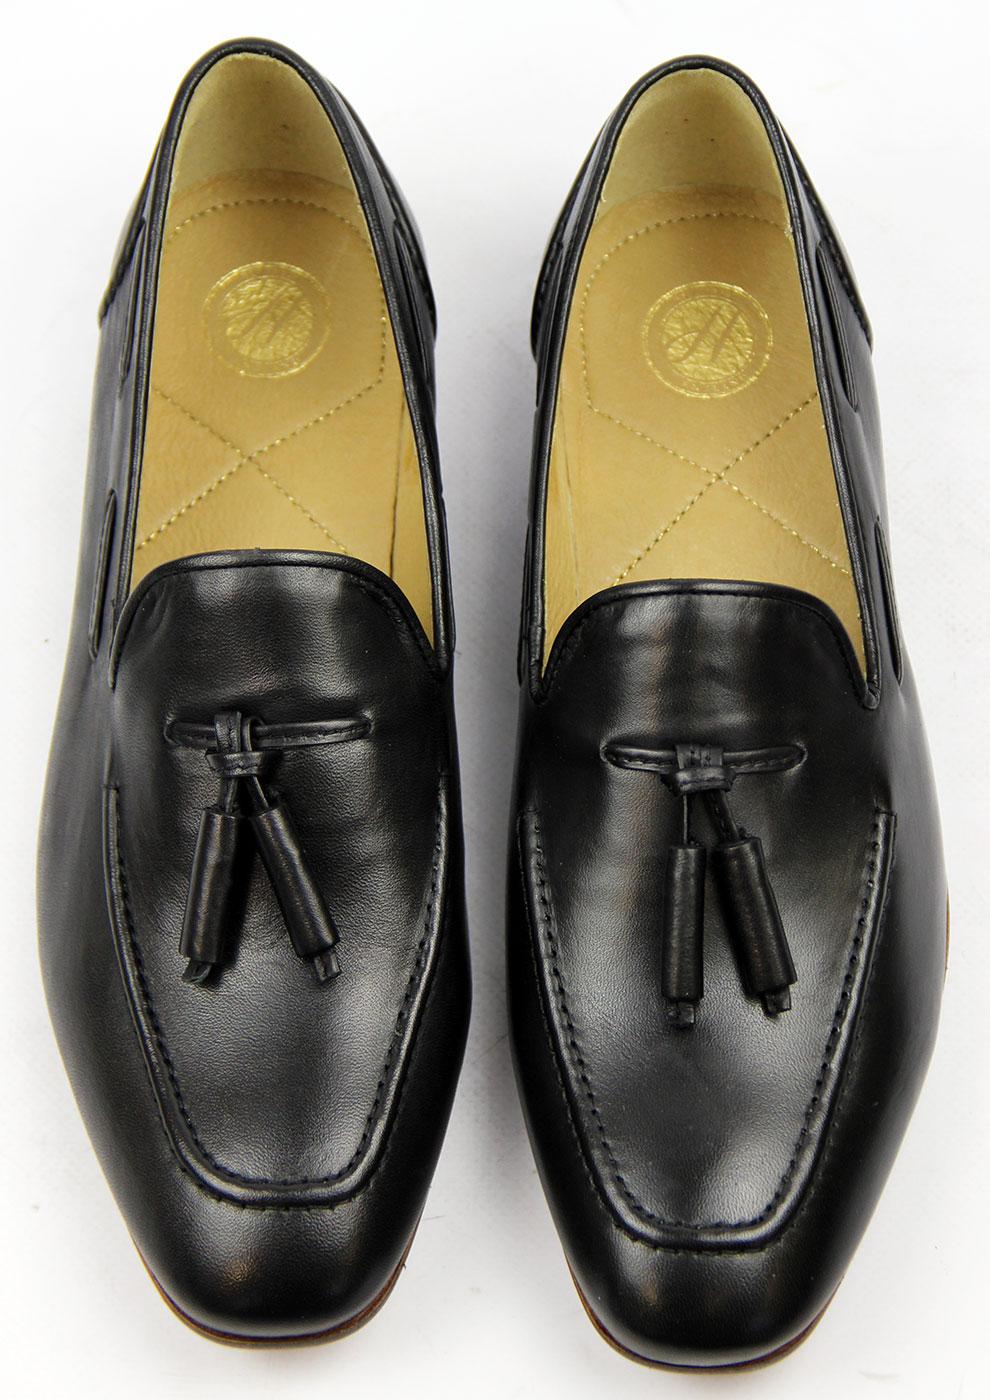 H by HUDSON Pierre Retro 60s Mod Black Leather Loafer Shoes